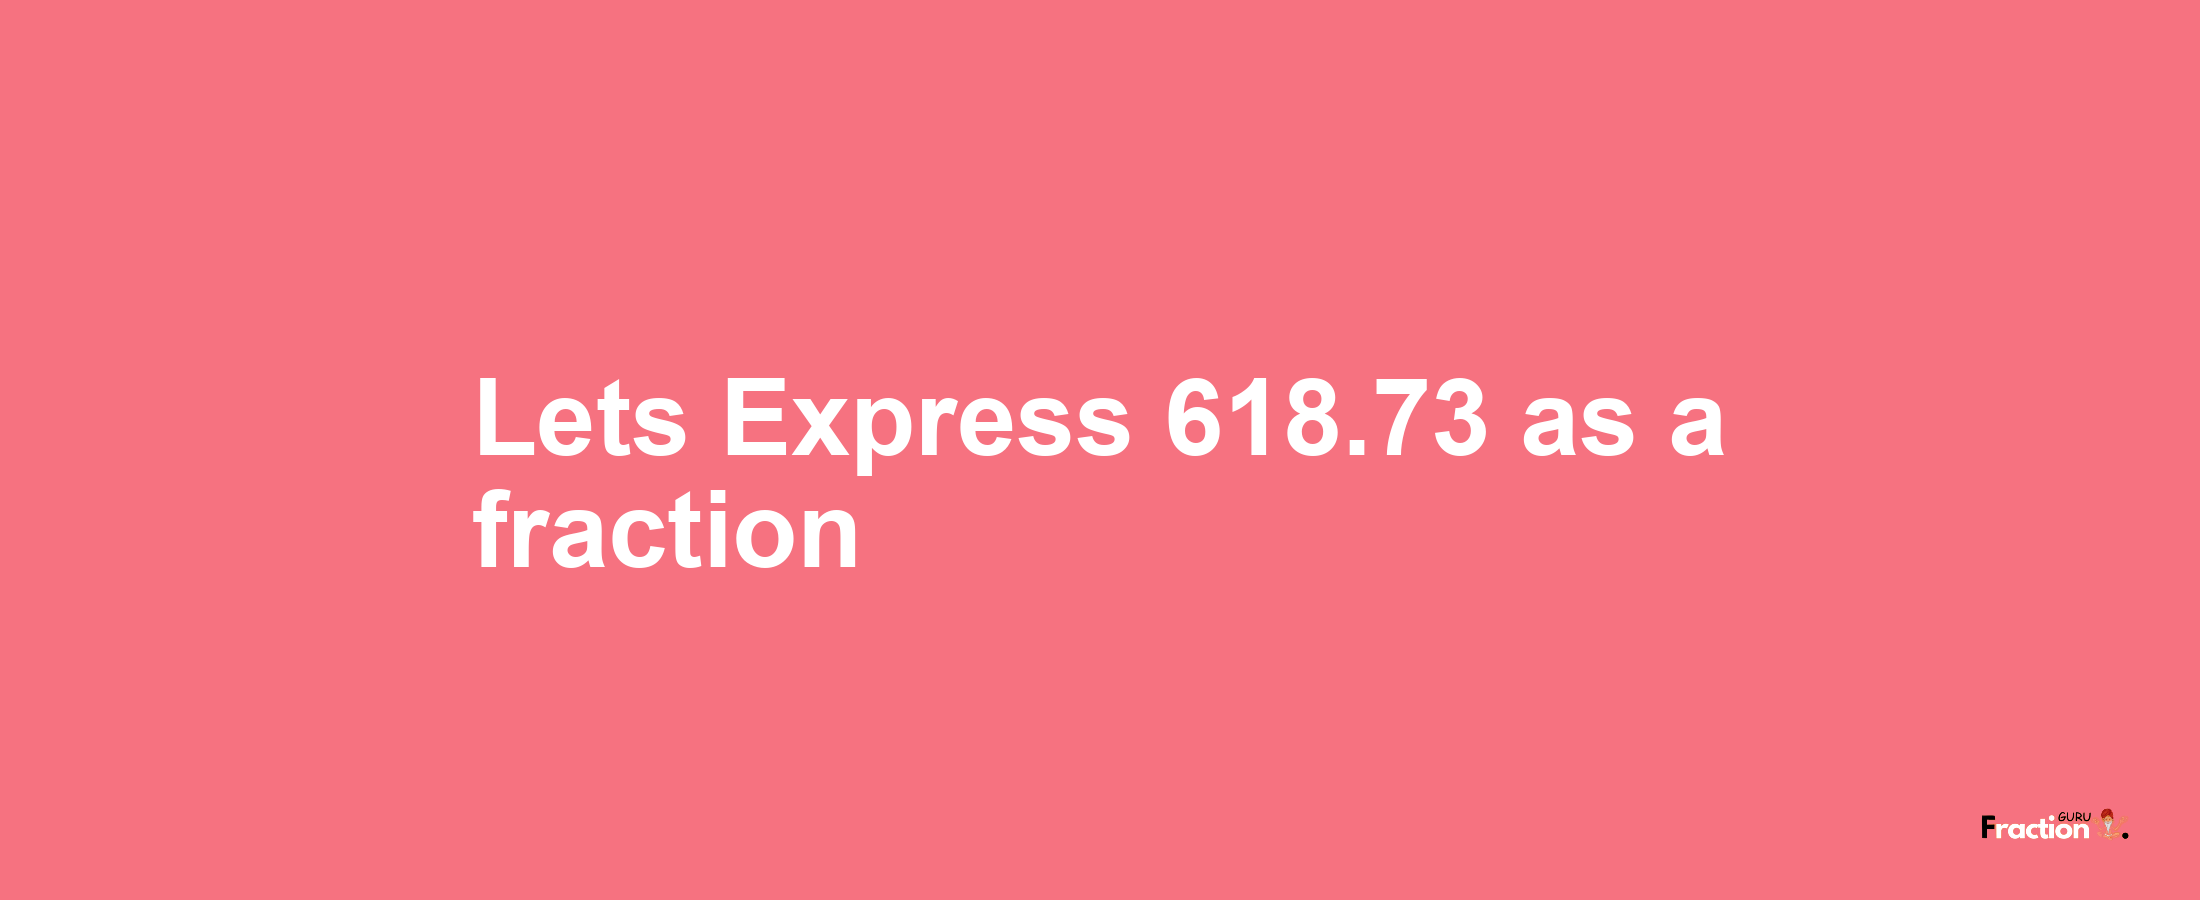 Lets Express 618.73 as afraction